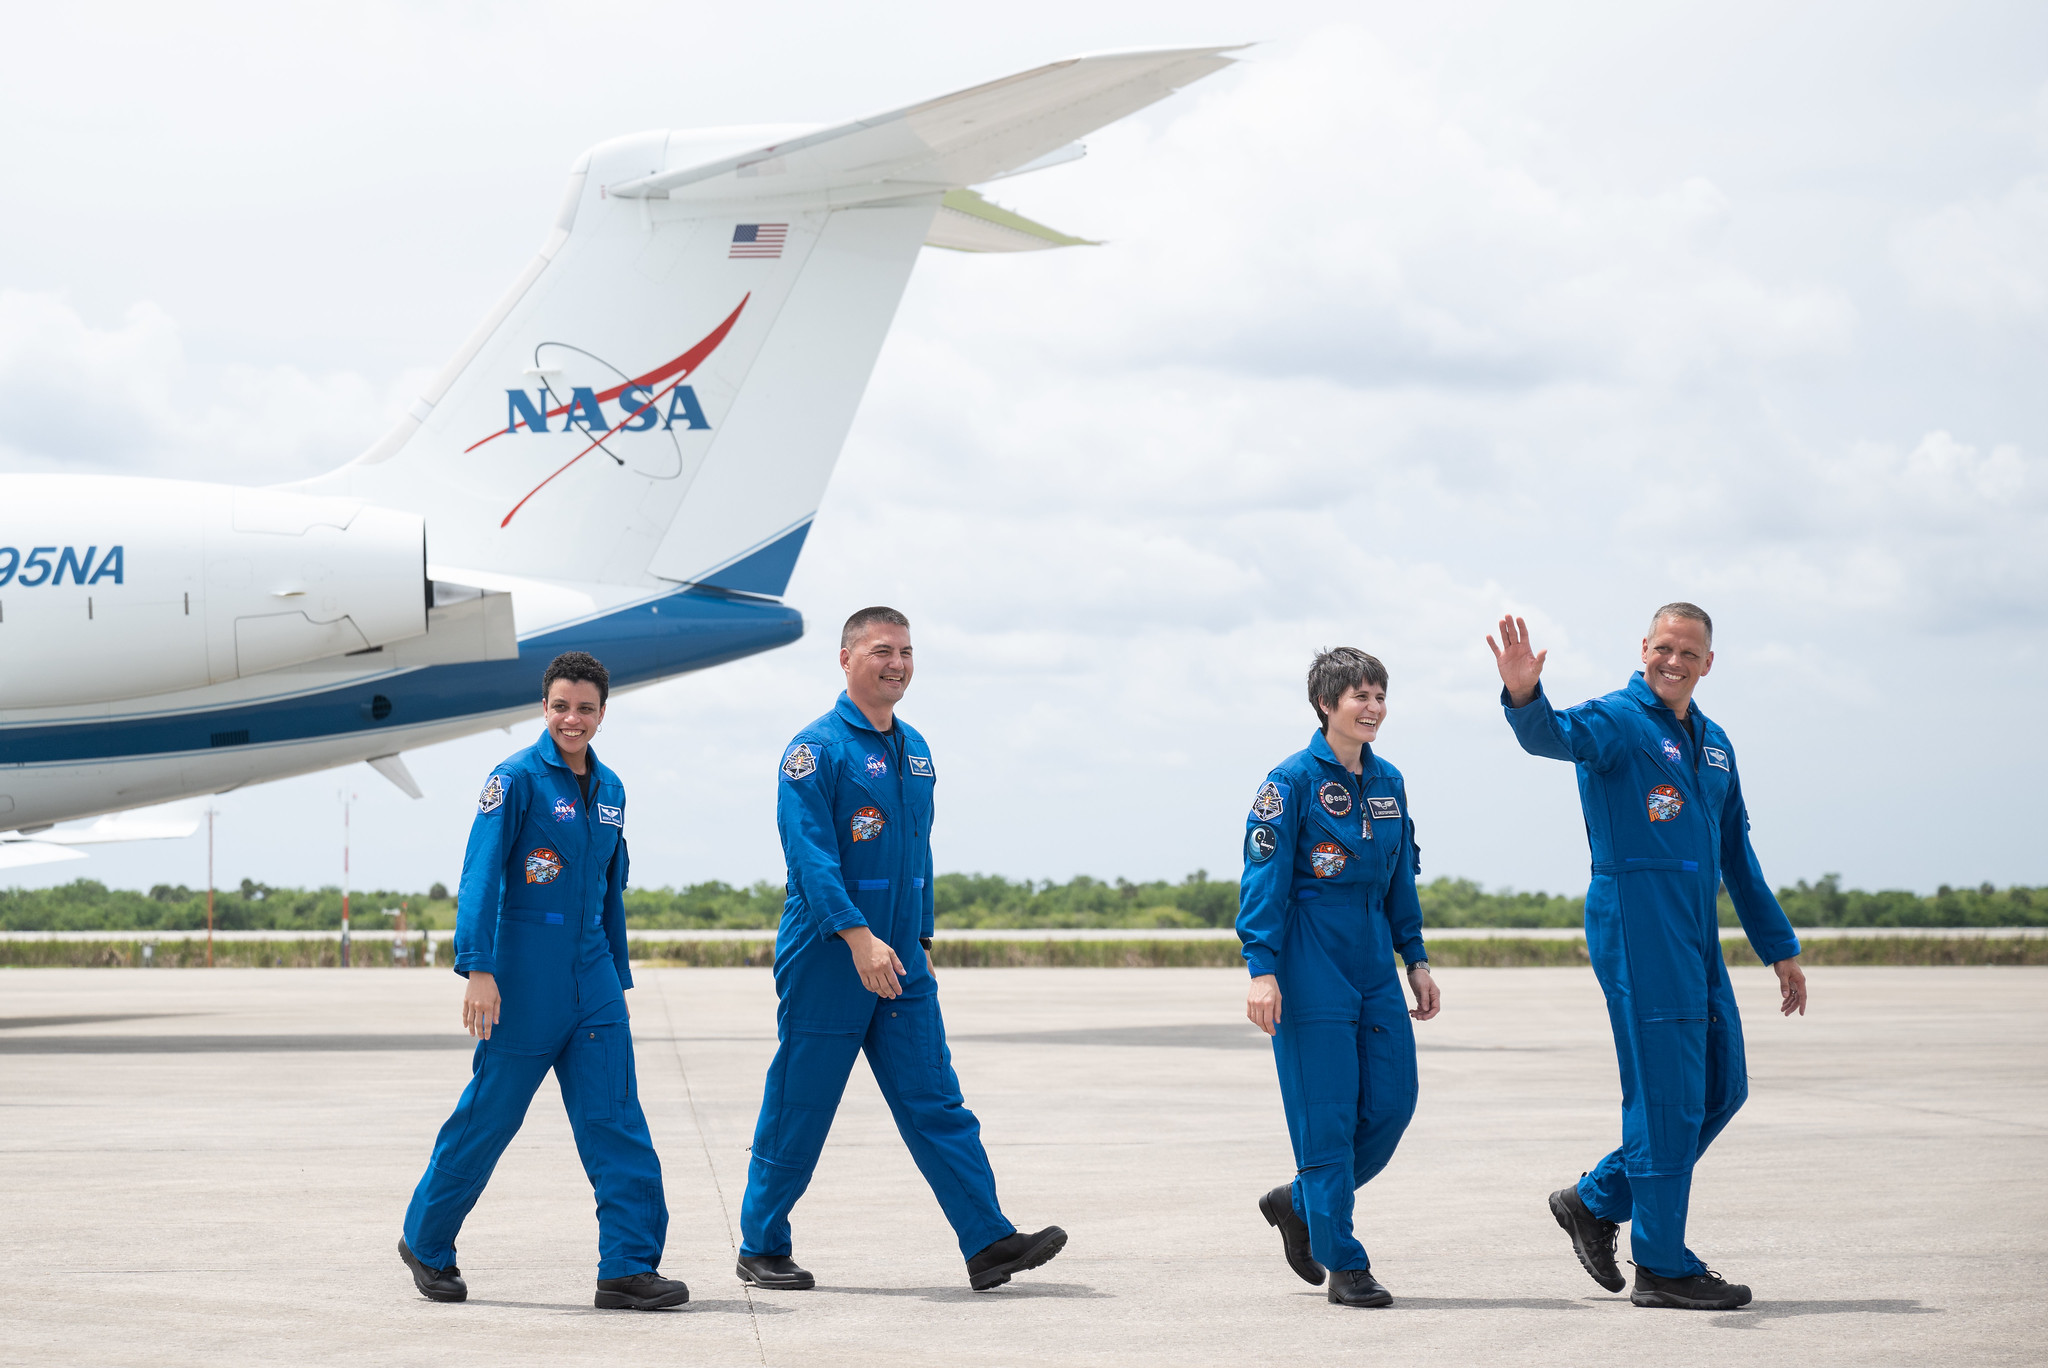 From the left: NASA astronauts Jessica Watkins, Kjell Lindgren, ESA astronaut Samantha Cristoforetti and NASA astronaut Robert Hines after their arrival in Florida on April 18, 2022 ahead of their Crew-4 launch.